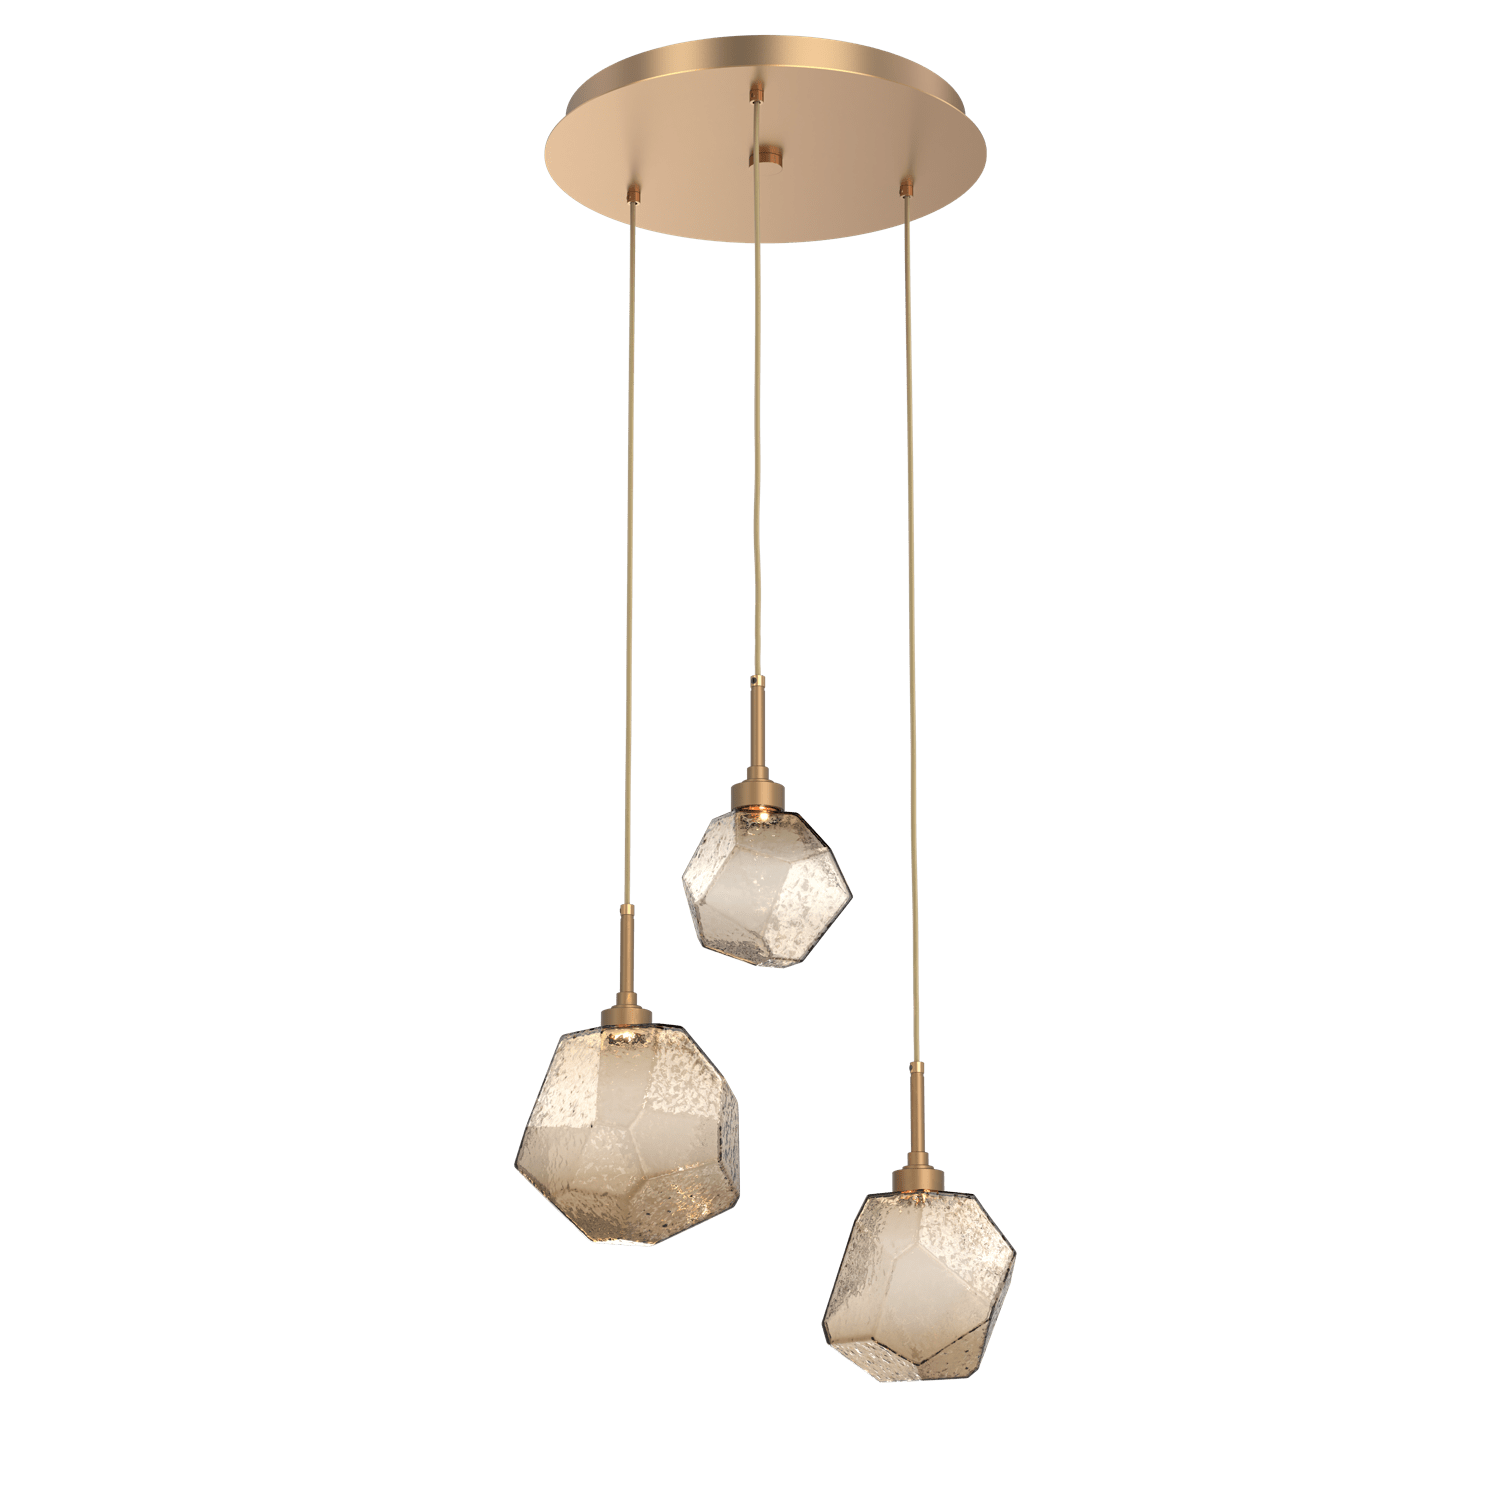 CHB0039-03-NB-B-Hammerton-Studio-Gem-3-light-round-pendant-chandelier-with-novel-brass-finish-and-bronze-blown-glass-shades-and-LED-lamping